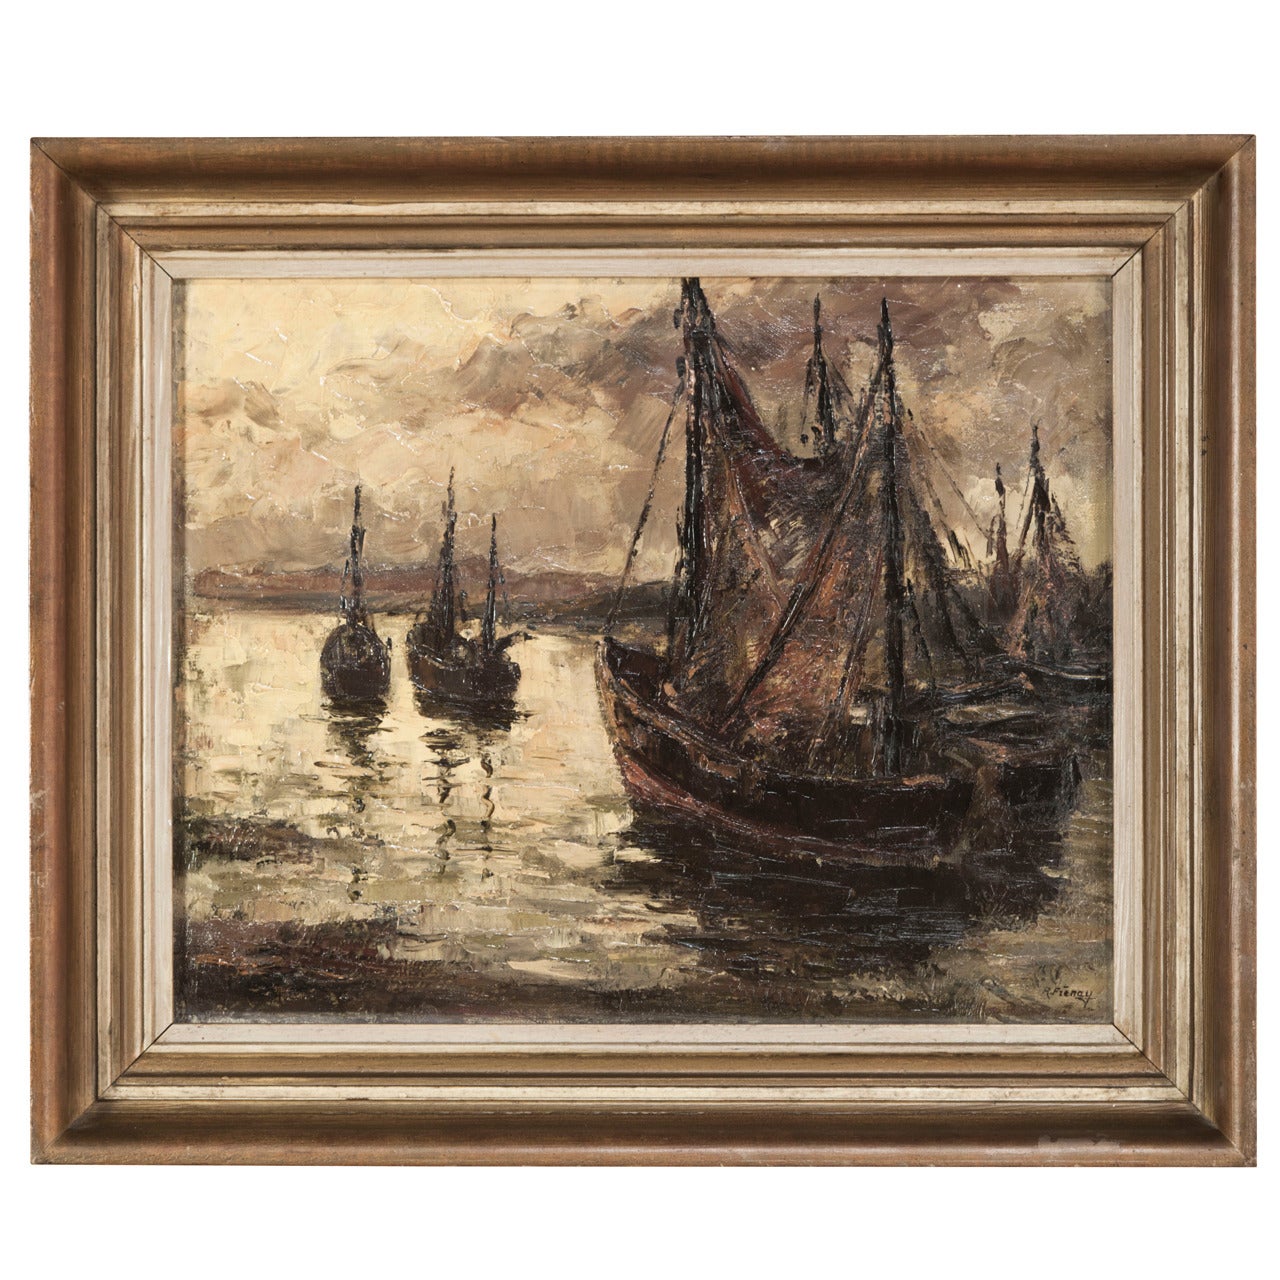 Hand Painted Original Oil on Canvas by Robert Frenay (1903-1986)